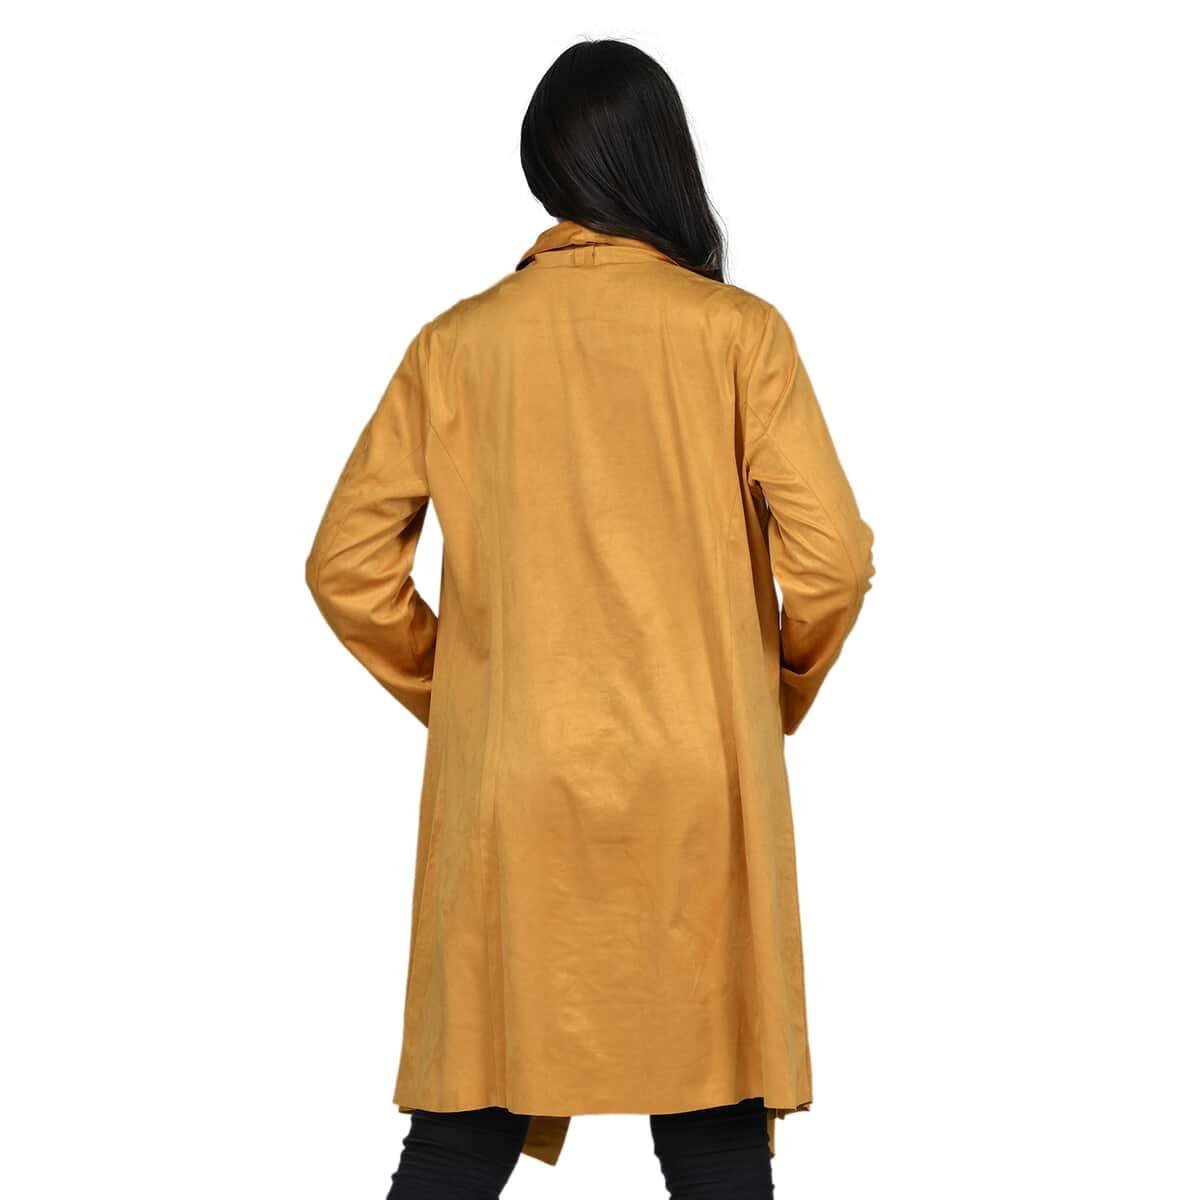 Passage Gold Faux Suede Long Waterfall Open Front Jacket For Ladies - XXL, Jacket for Women, Long Coat Jacket for Women, Womens Coats image number 1